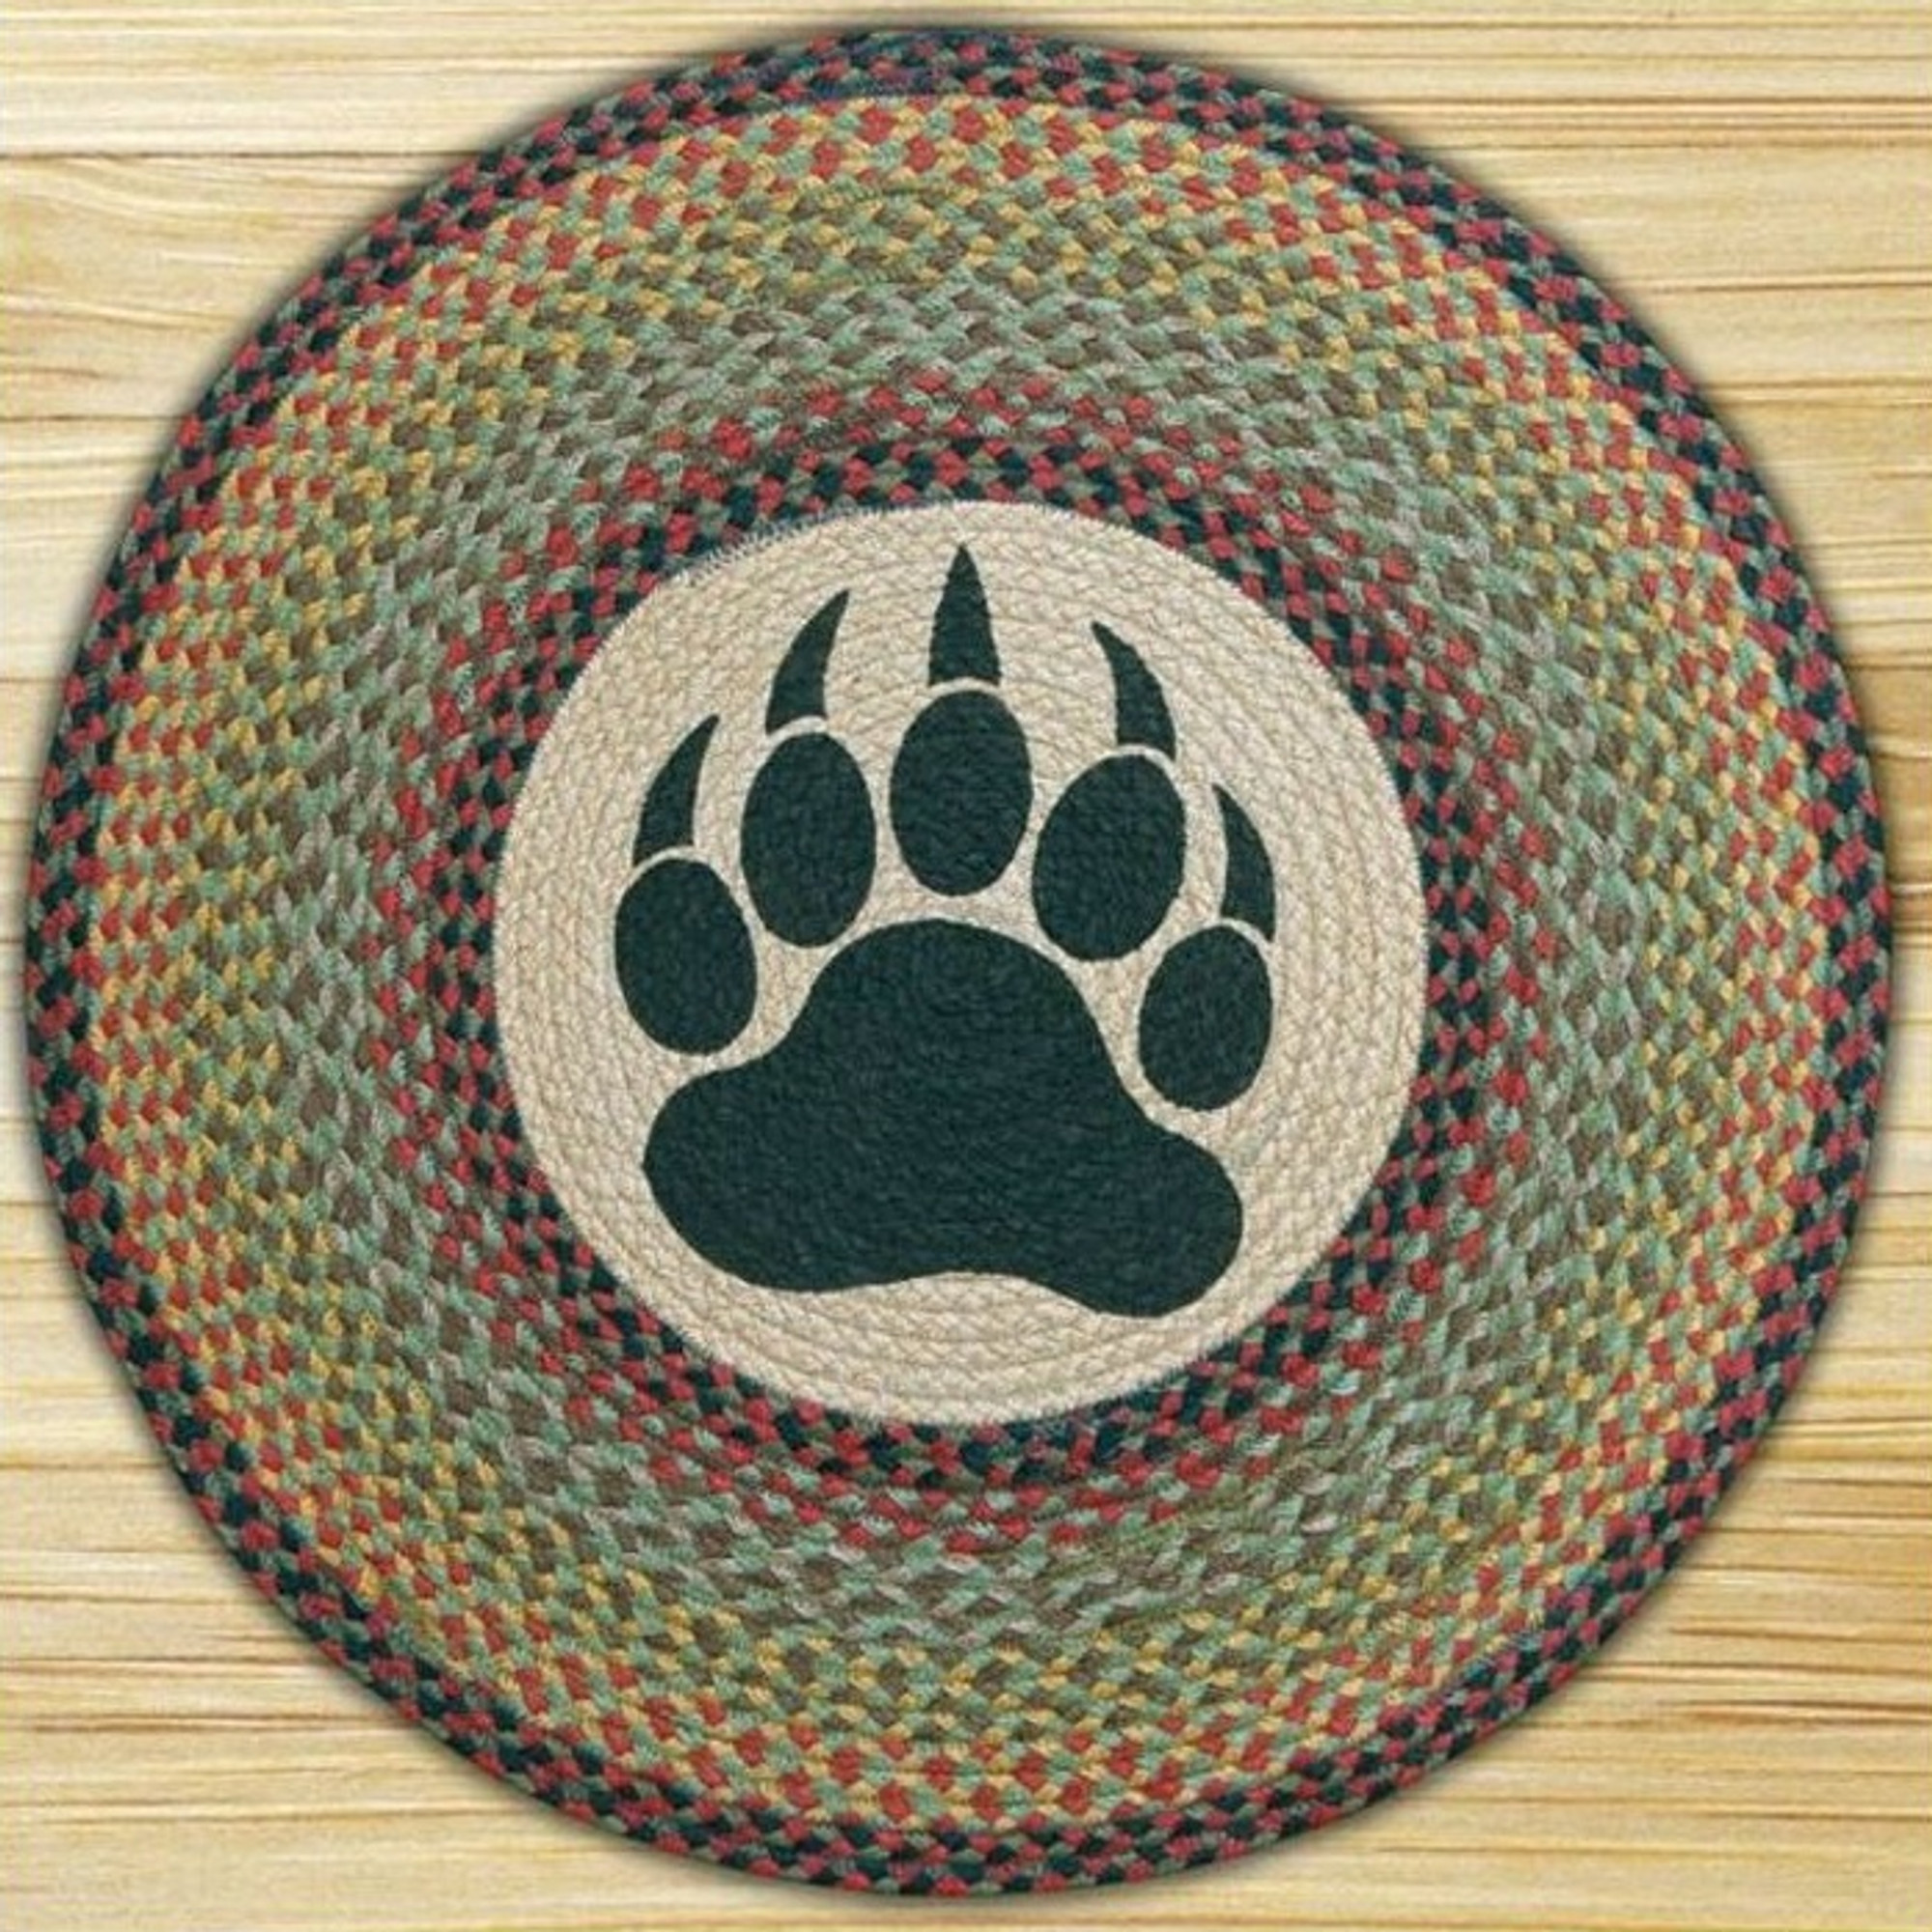 https://cdn11.bigcommerce.com/s-ob7m2s98/images/stencil/2000x2000/products/6095/11917/bear_paw_round_rug__69777.1447010291.jpg?c=2